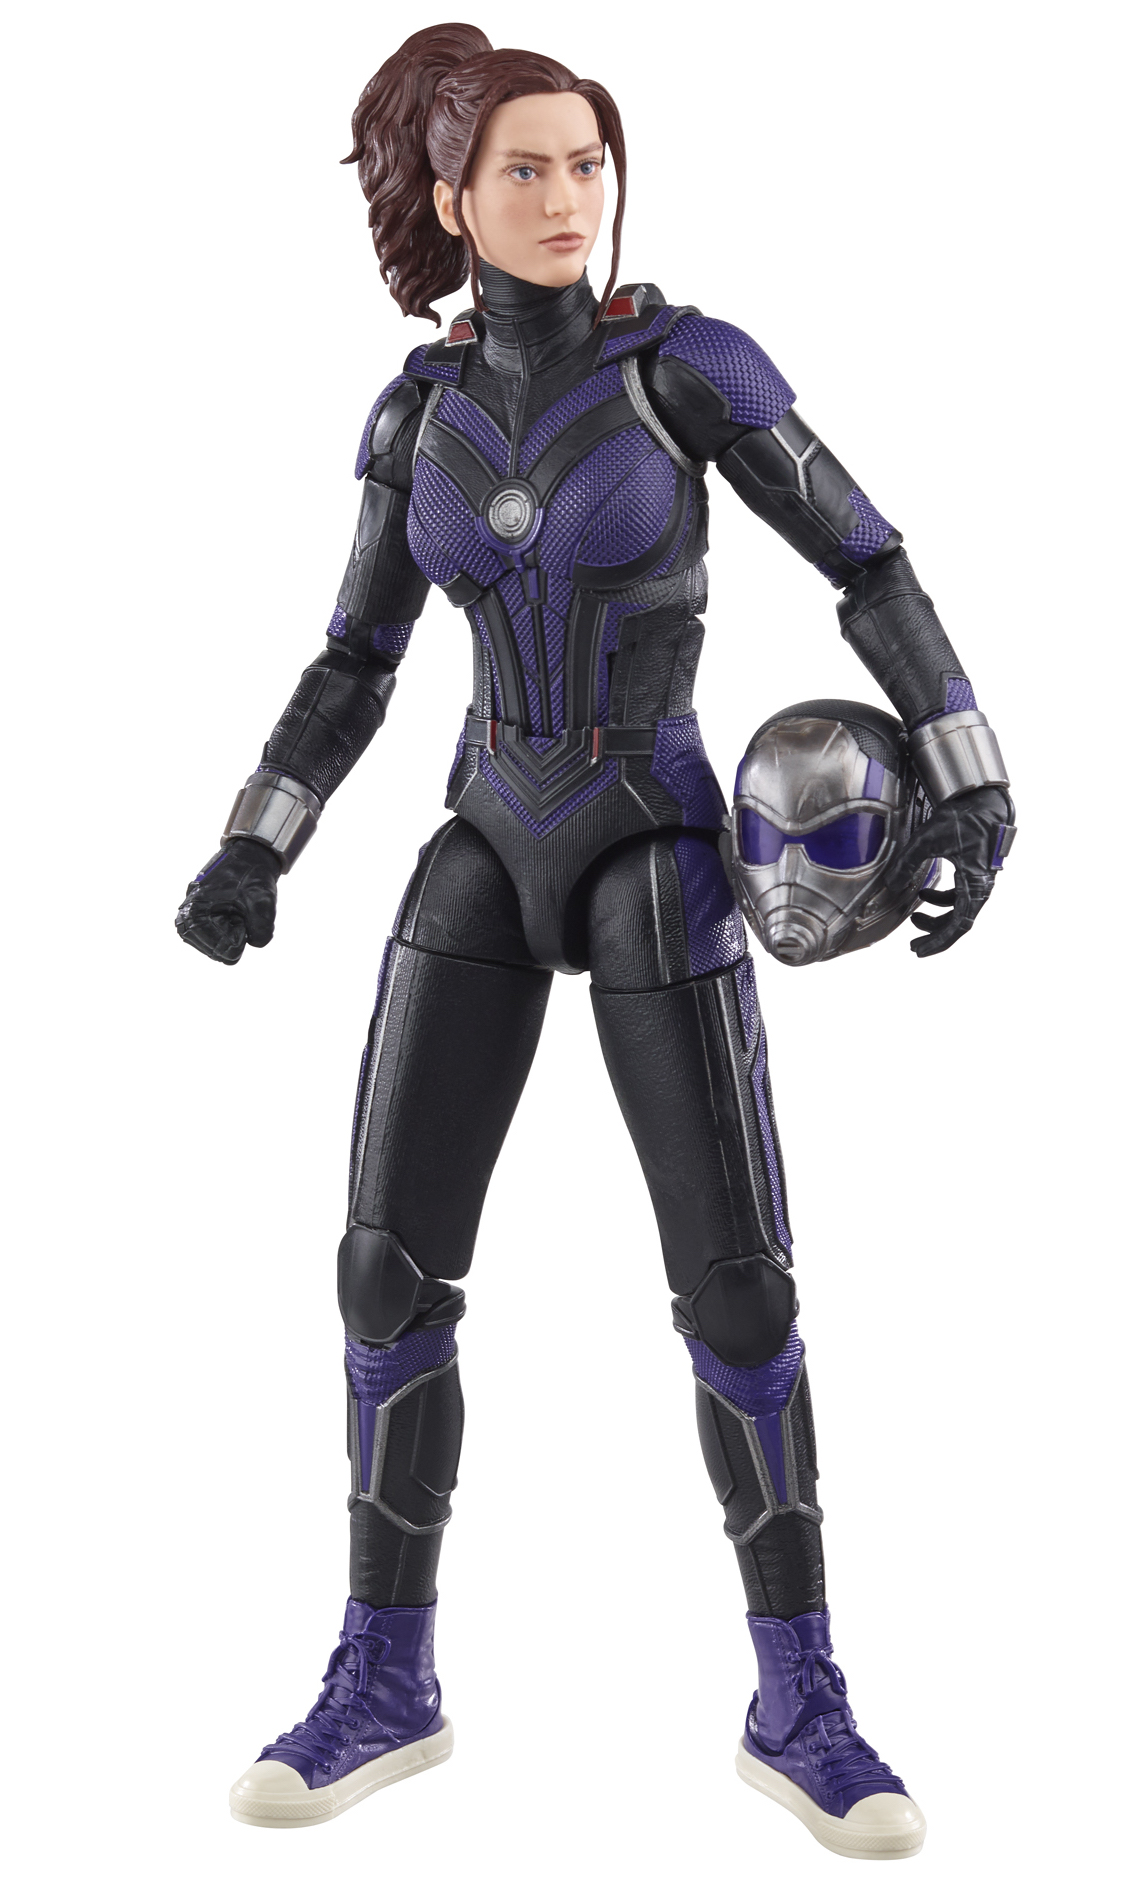 Ant-Man & the Wasp: Quantumania Marvel Legends Kang the Conqueror 6-Inch  Action Figure